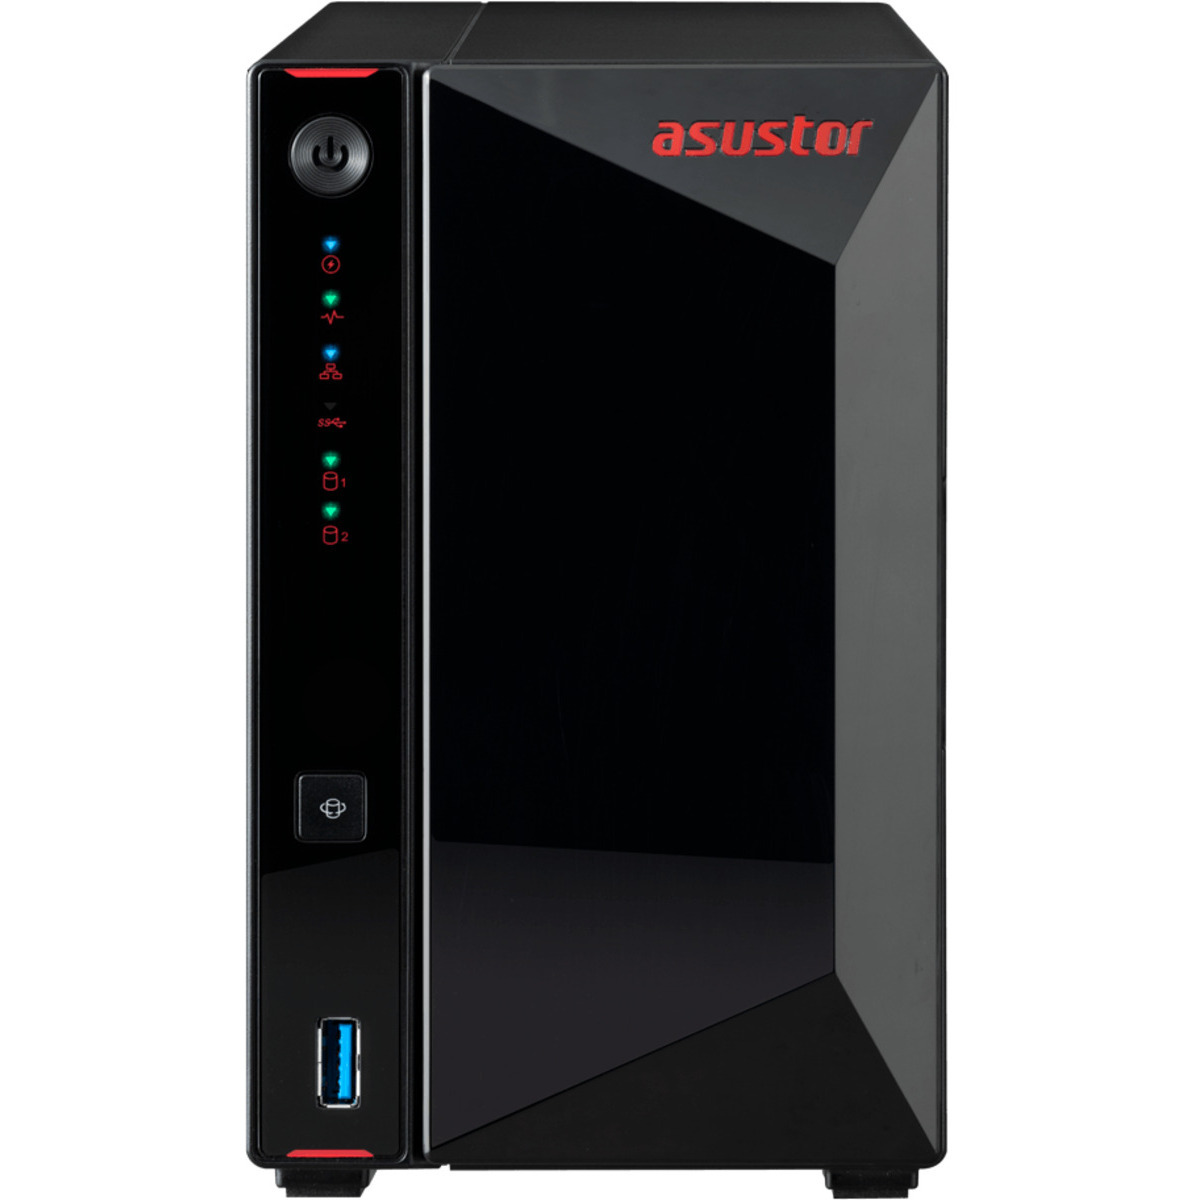 buy $658 ASUSTOR AS5202T Nimbustor 1tb Desktop NAS - Network Attached Storage Device 2x500gb Seagate IronWolf 125 ZA500NM10002 2.5 SATA 6Gb/s SSD NAS Class Drives Installed - Burn-In Tested - FREE RAM UPGRADE - nas headquarters buy network attached storage server device das new raid-5 free shipping usa AS5202T Nimbustor